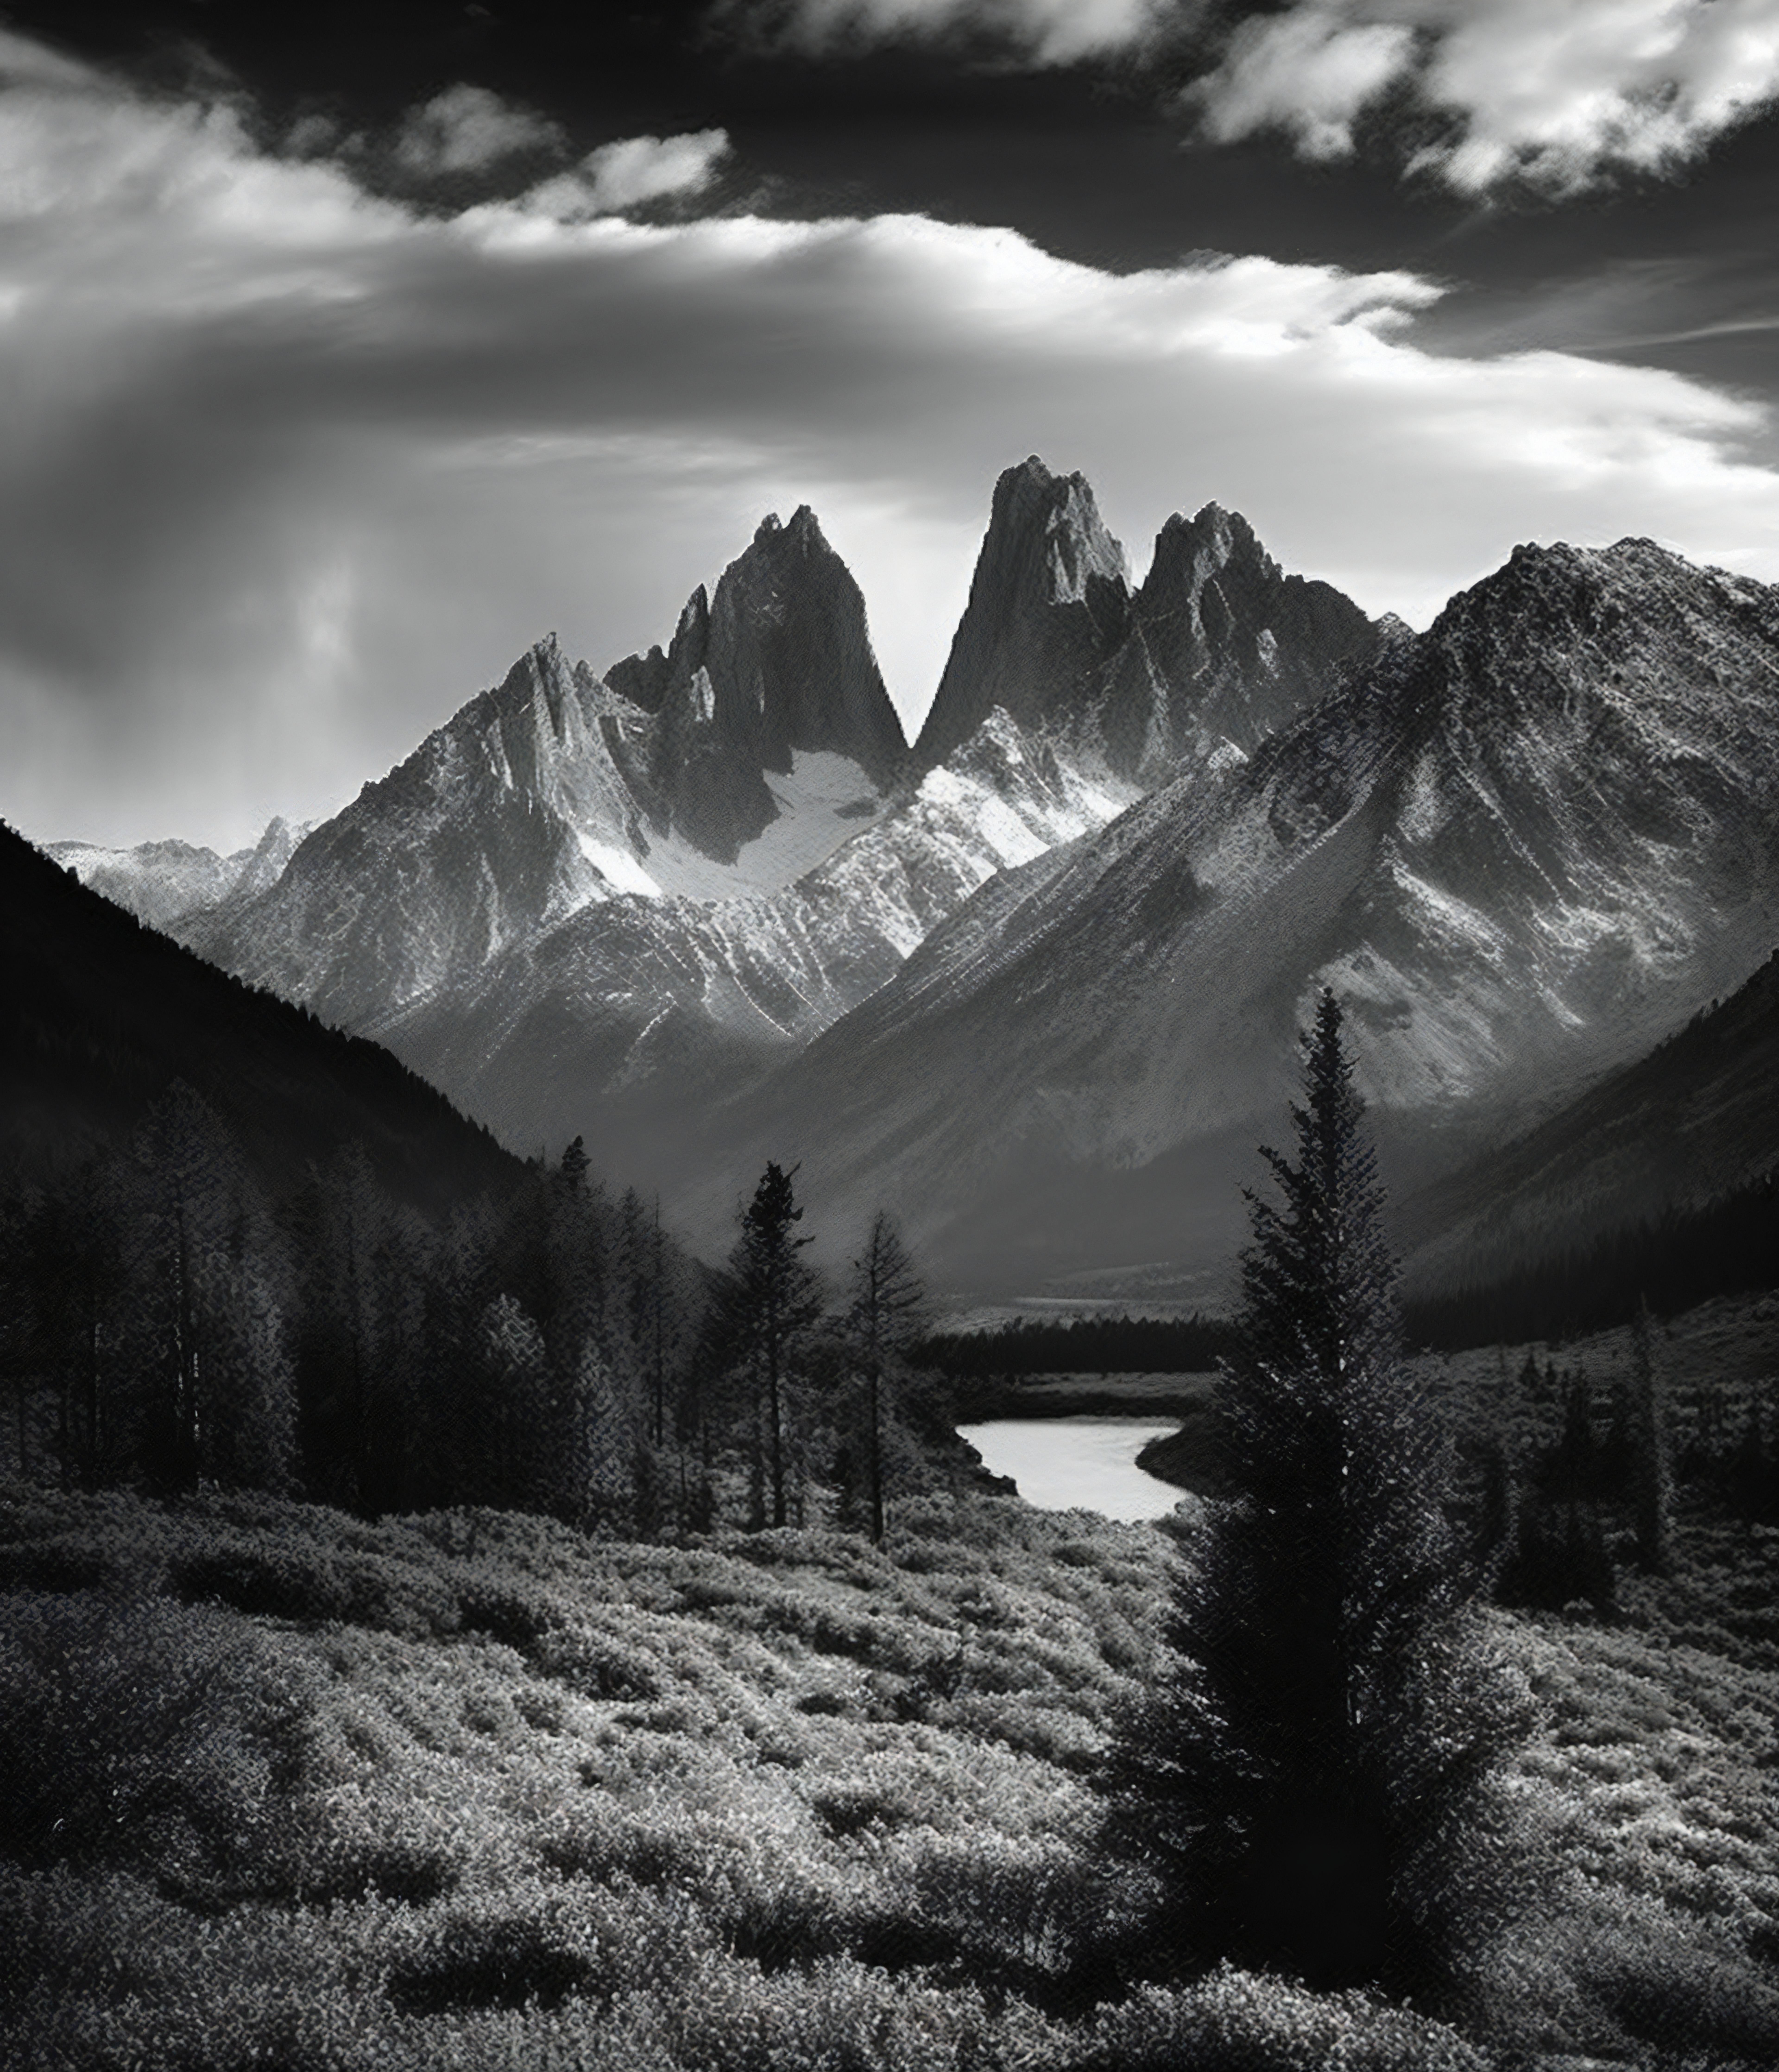 The photograph features a panoramic view of a mountain range, emphasizing the majesty and grandeur of the natural landscape. The composition is dominated by the soaring peaks and rugged terrain, with smaller details such as trees and streams serving to provide a sense of scale and perspective, The photograph is in black and white, emphasizing the stark contrast between light and dark and capturing the raw, elemental quality of the landscape.